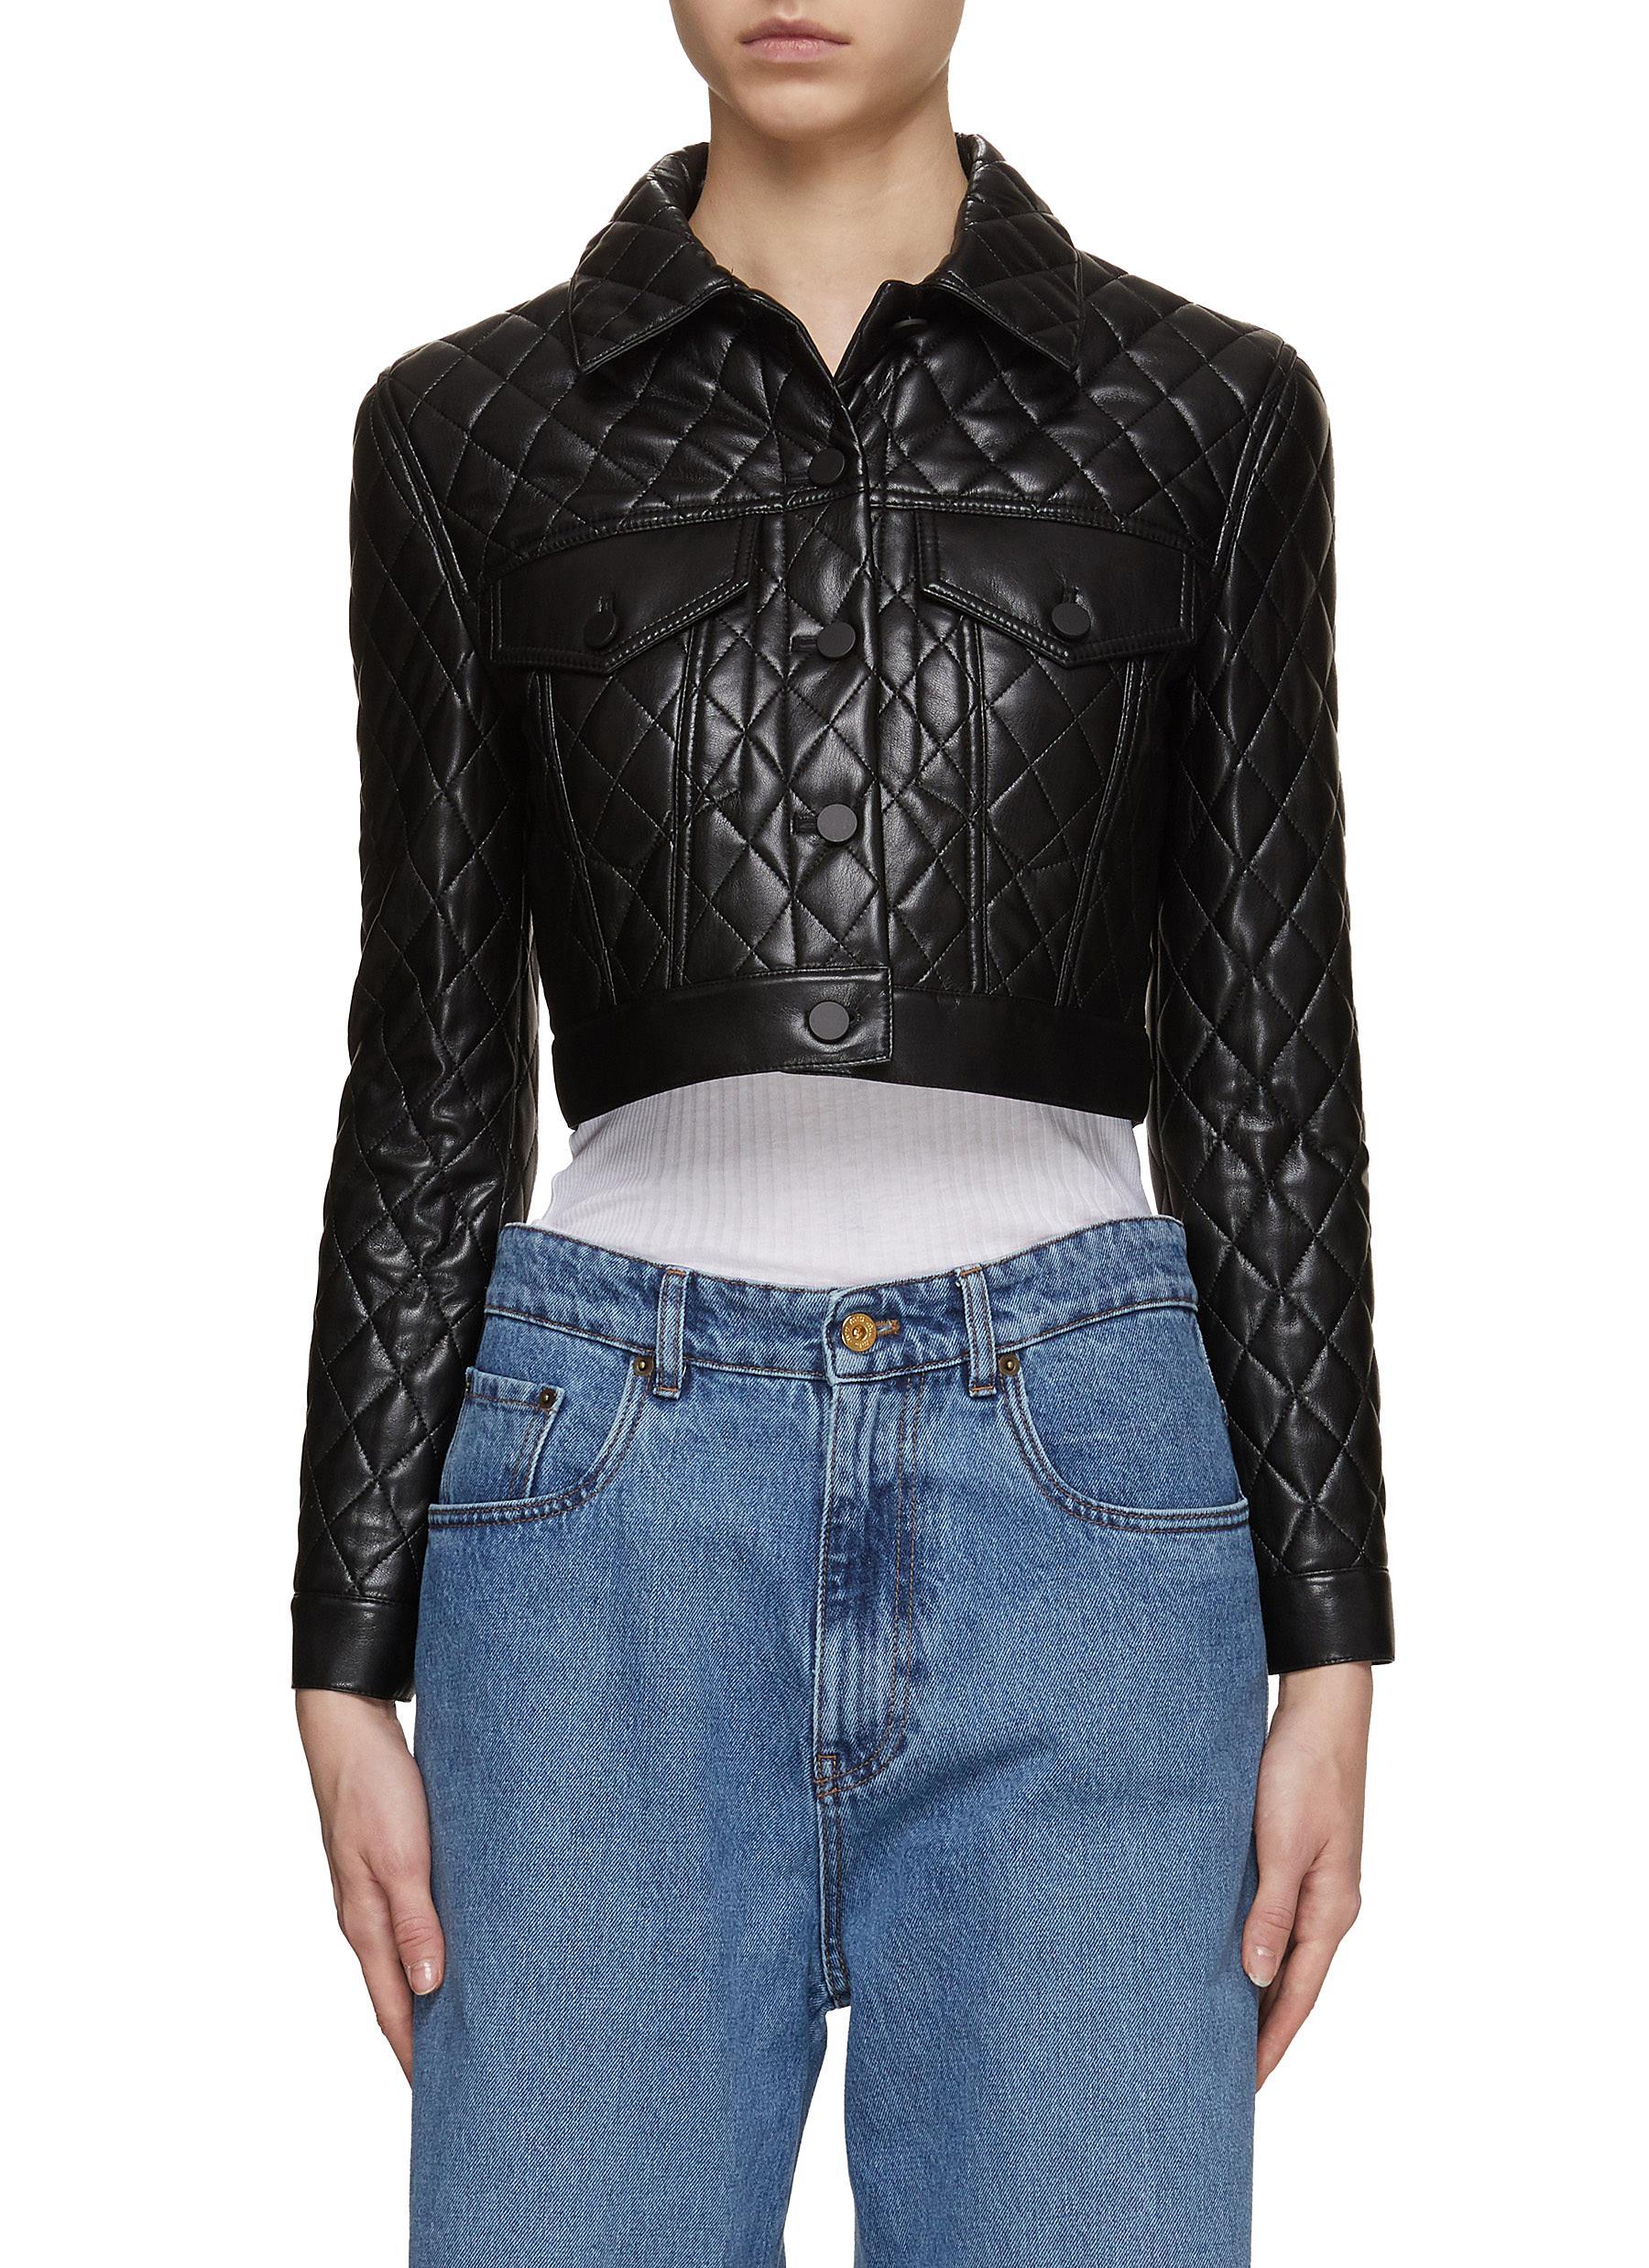 Chloe Quilted Vegan Leather Cropped Jacket